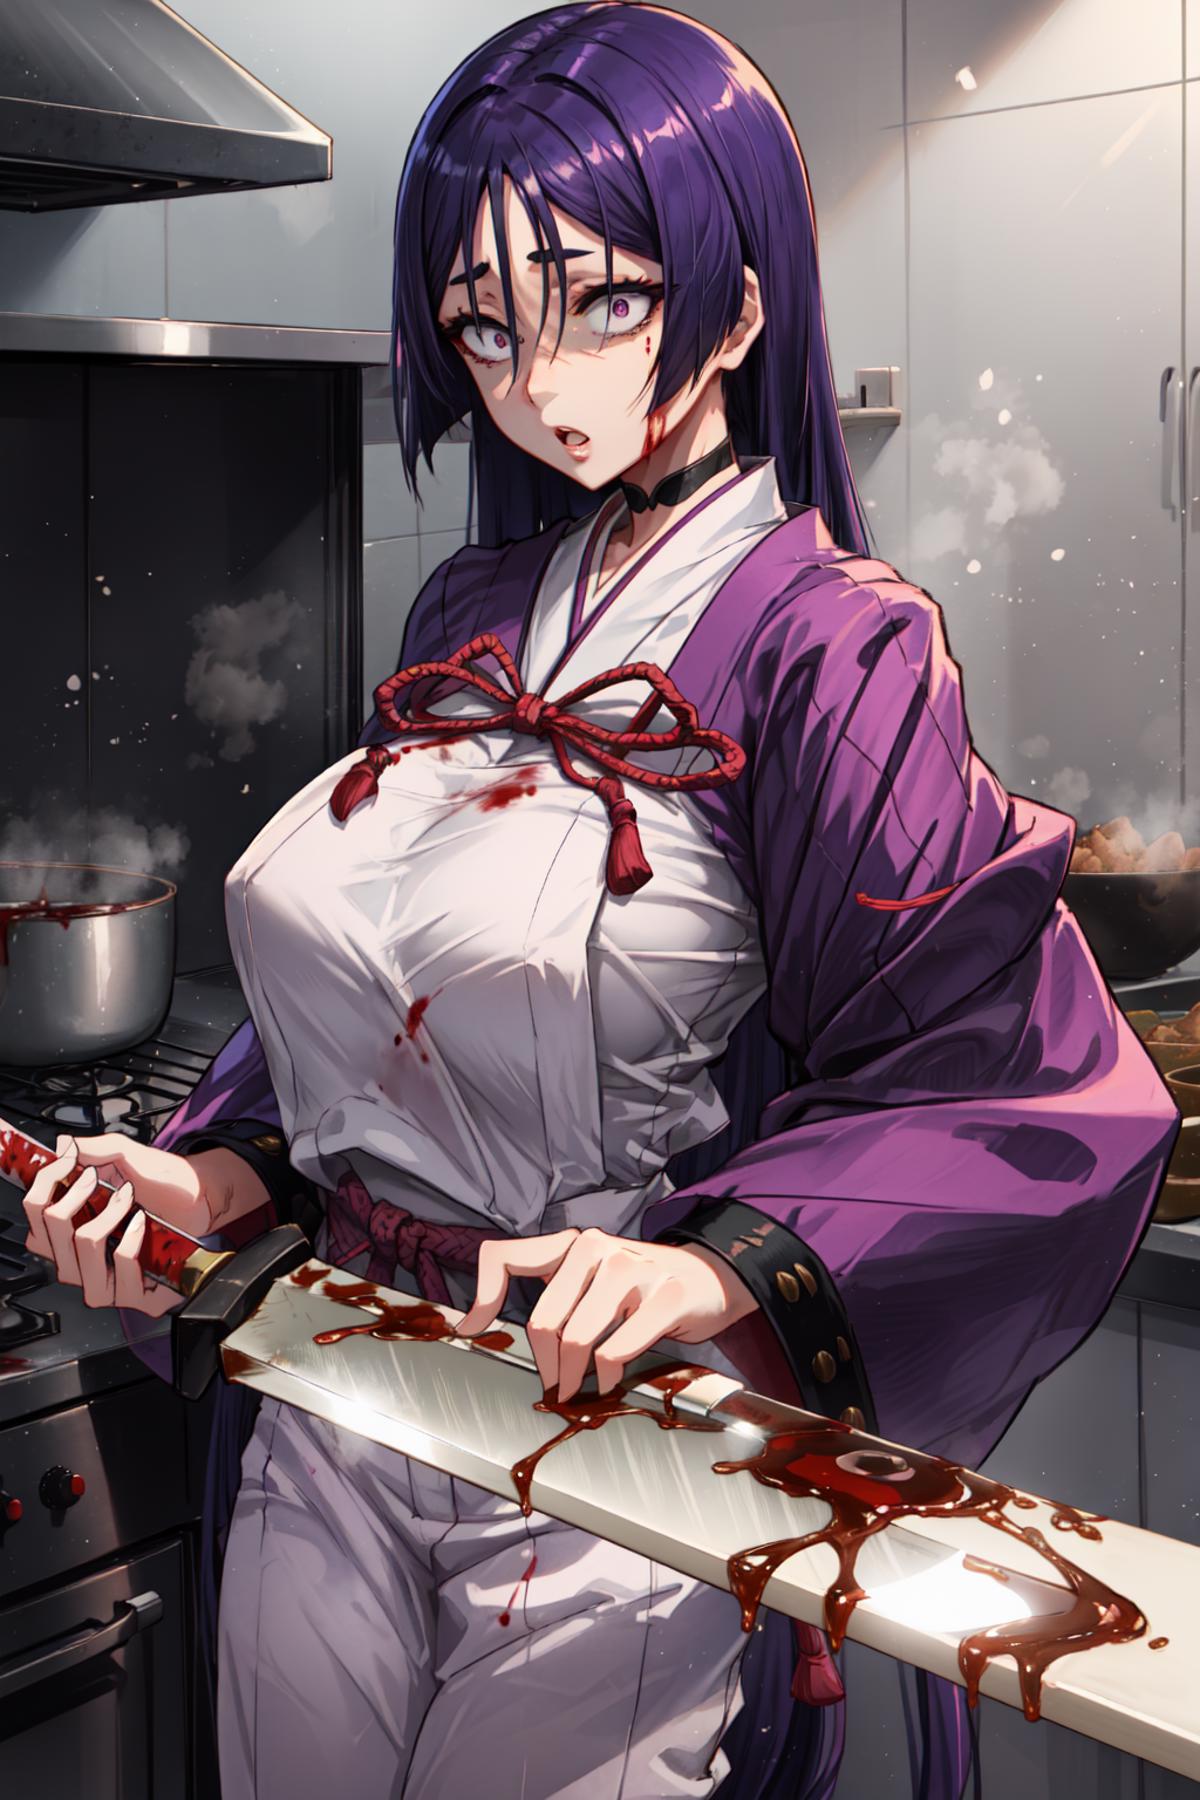 Anime character holding a sword in a kitchen with blood on her clothes.